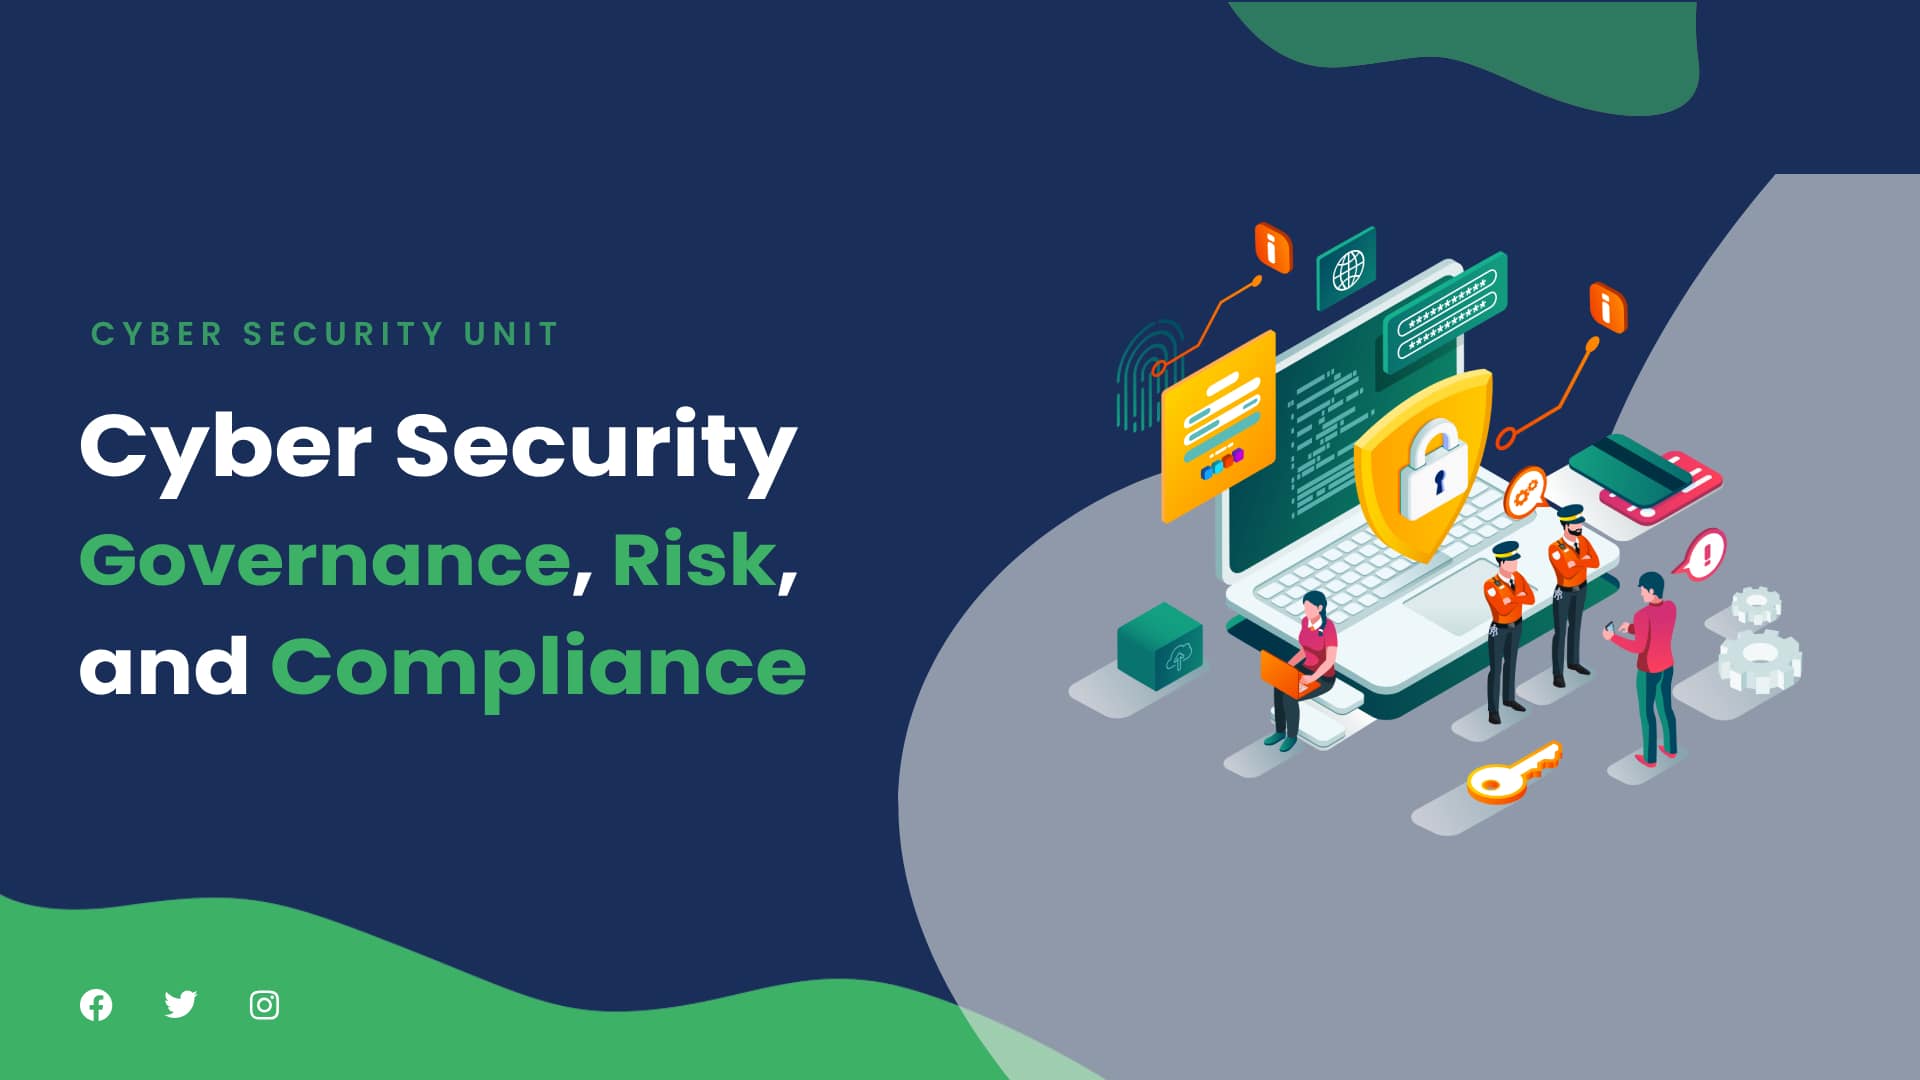 Cyber Security Governance, Risk, and Compliance